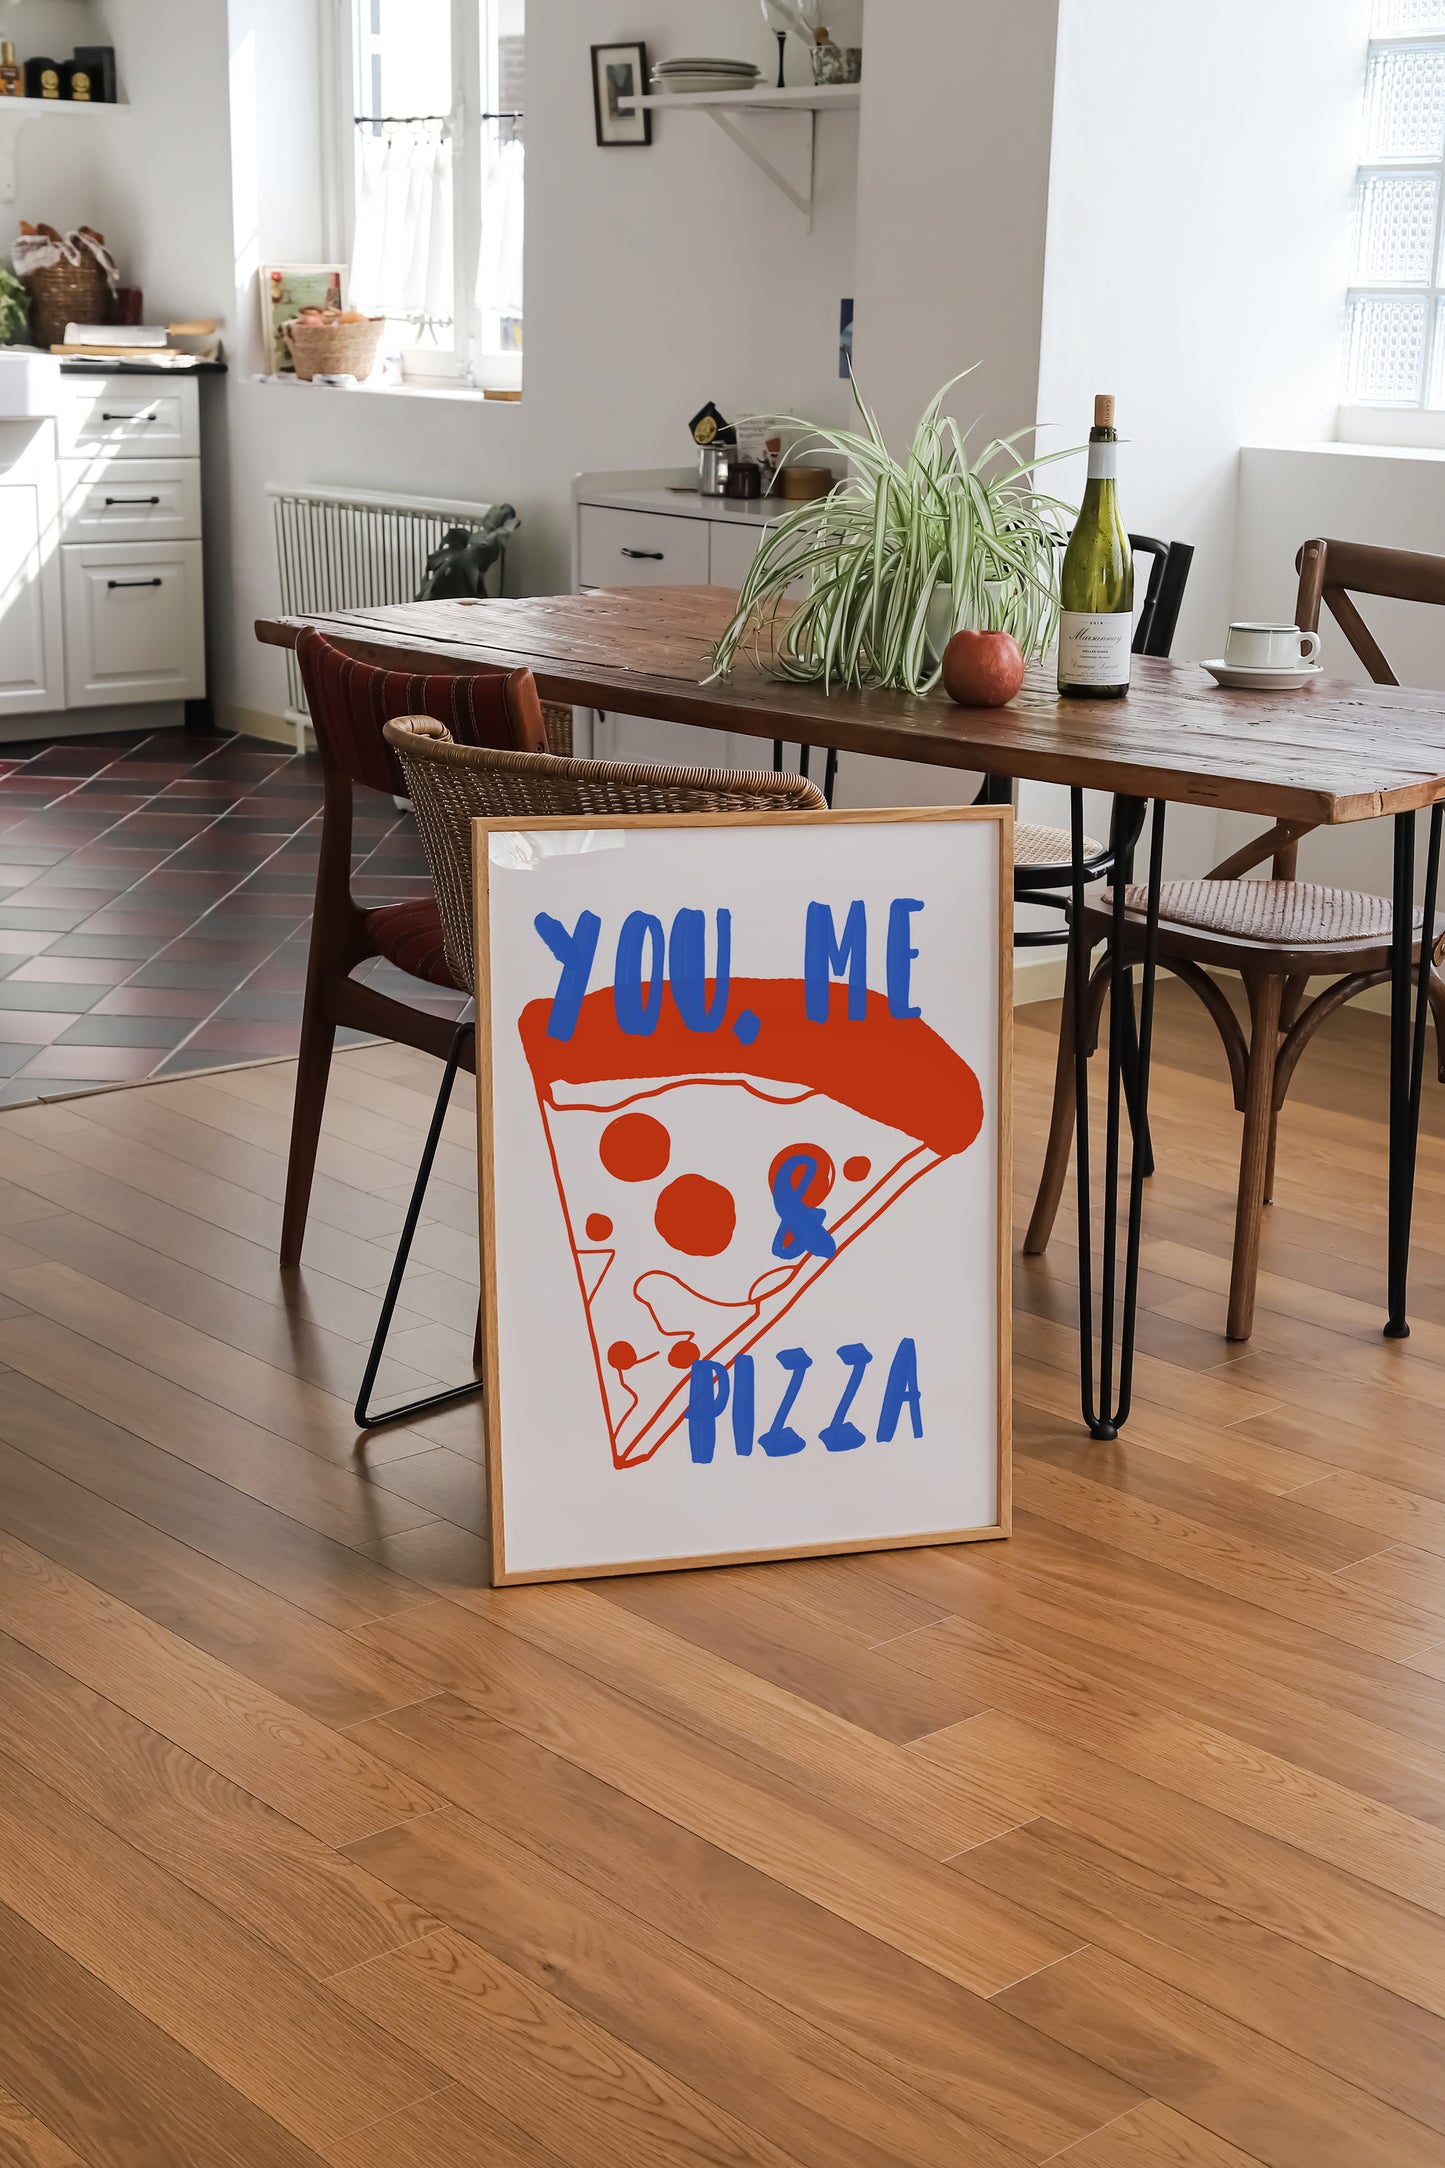 a sign that says you're pizza on the floor